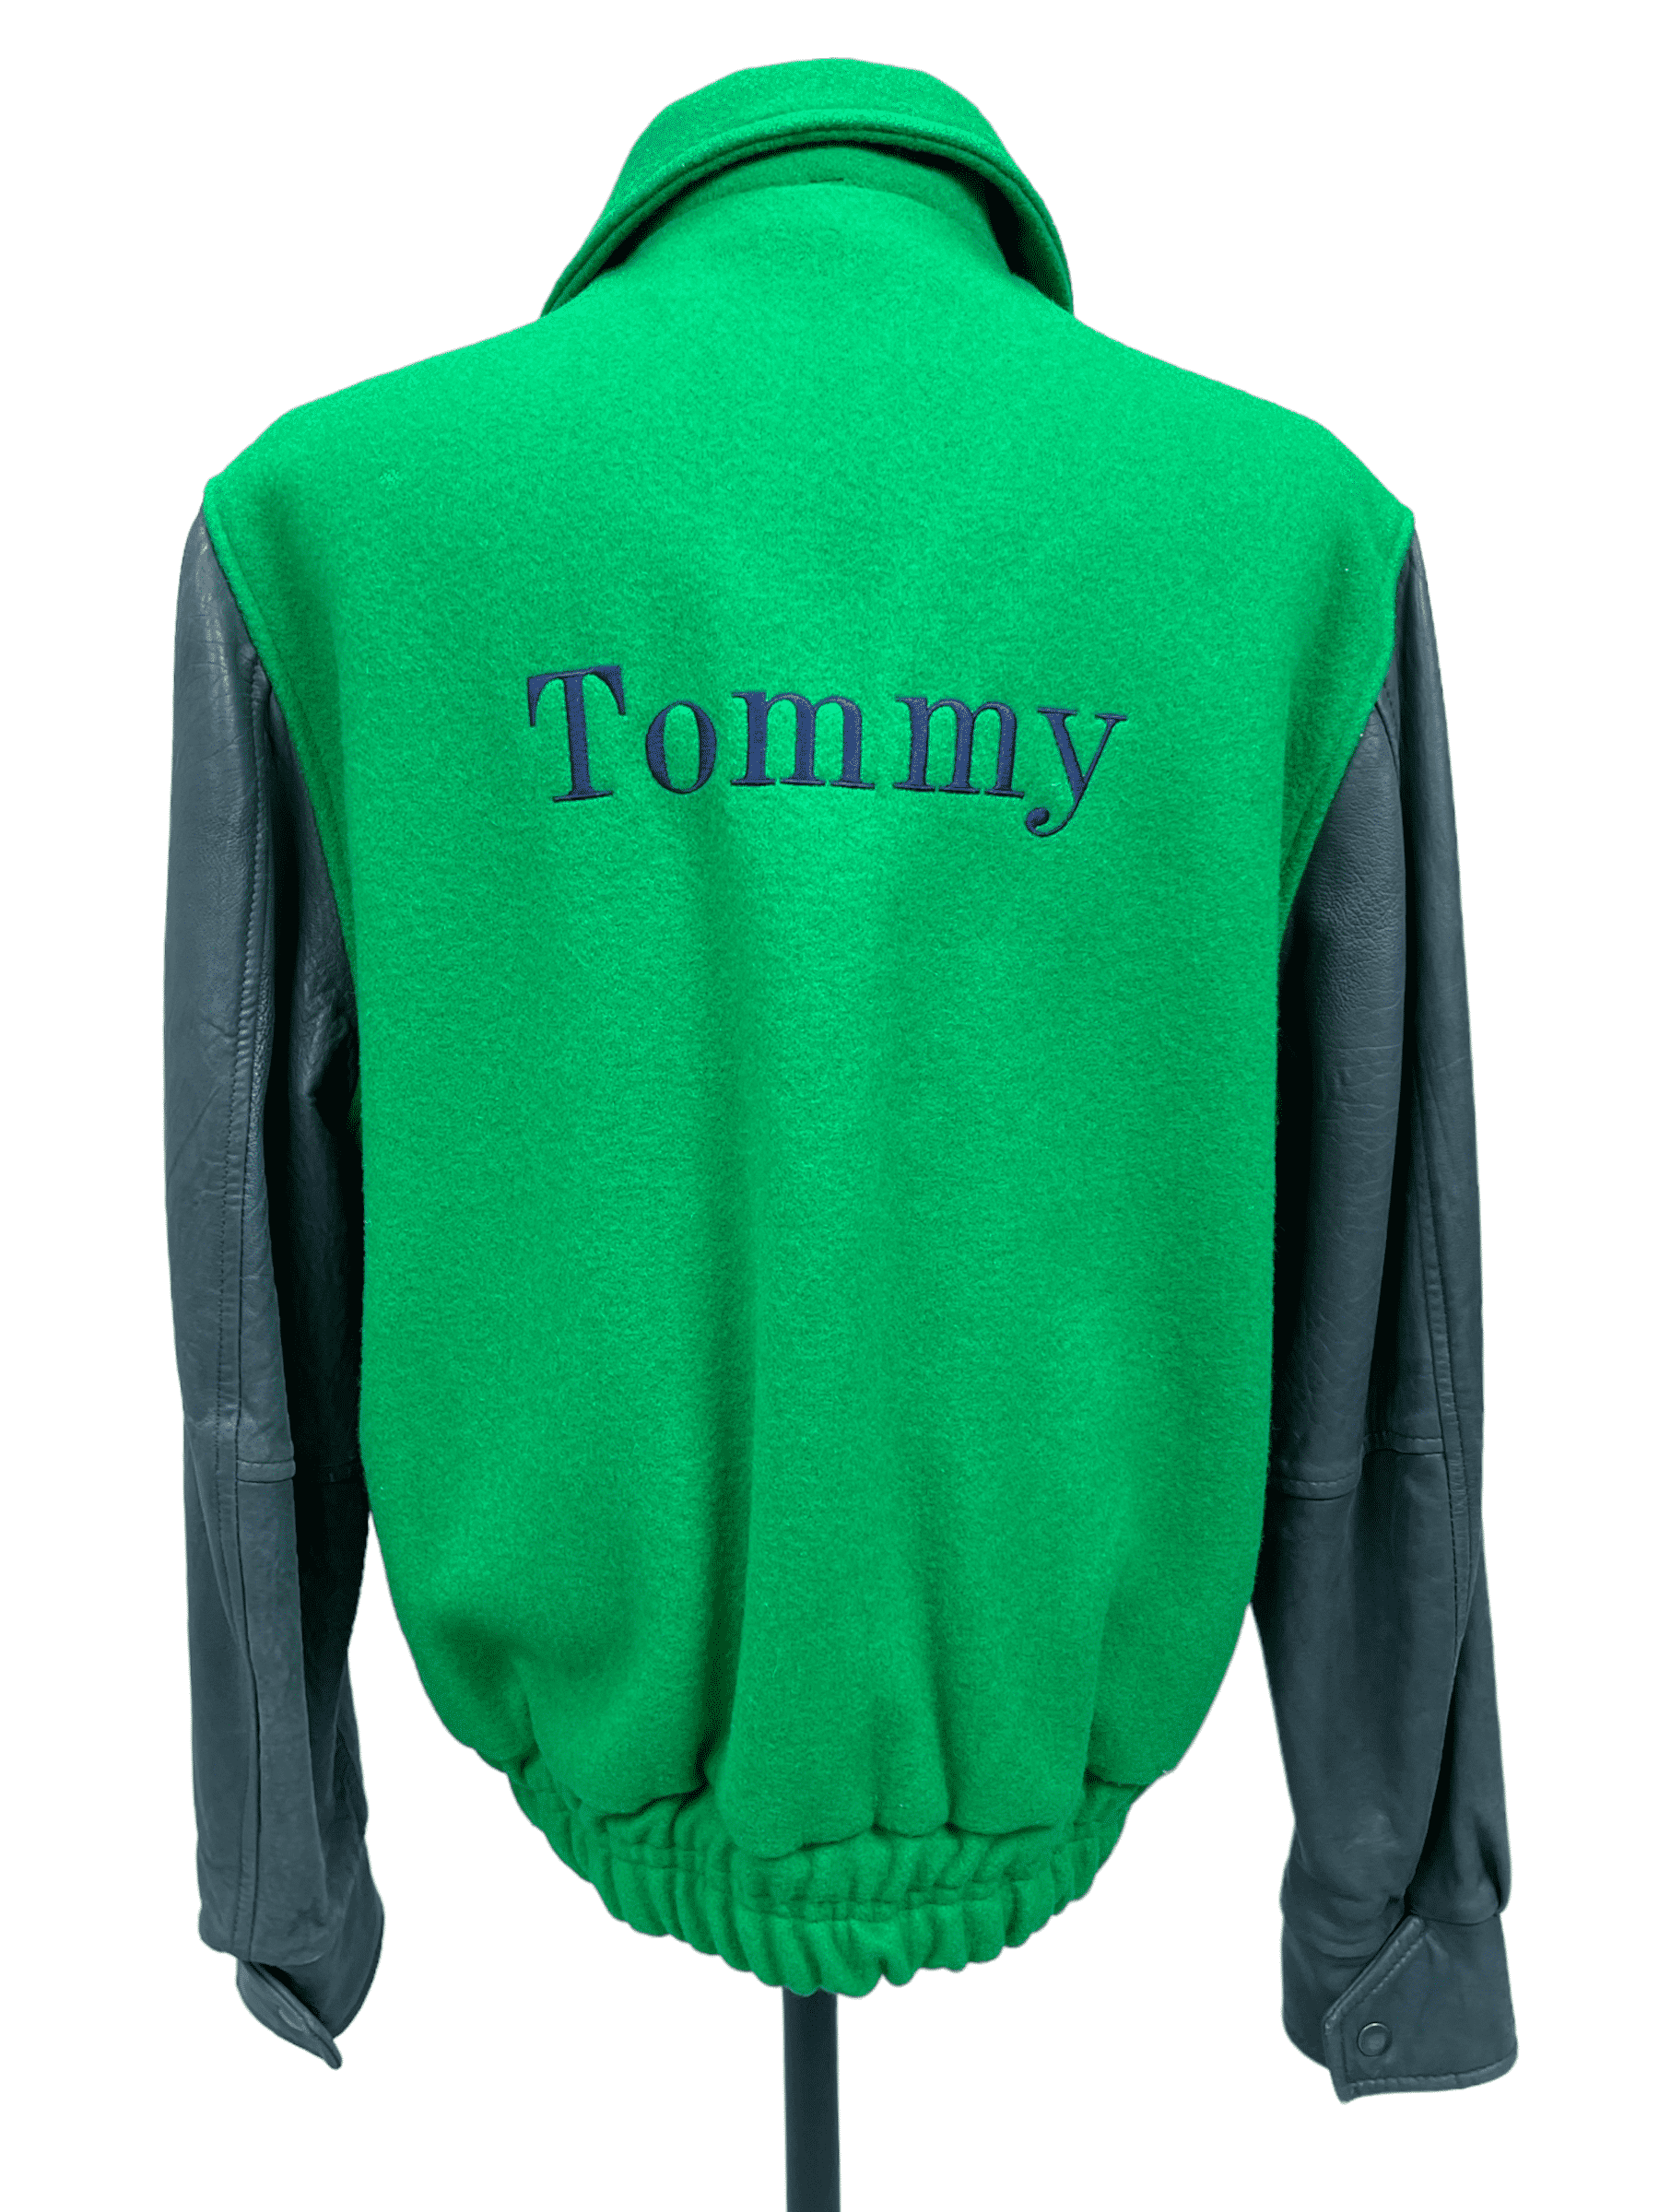 Tommy Hilfiger Varsity Green Jacket - Genuine Design Luxury Consignment for Men. New & Pre-Owned Clothing, Shoes, & Accessories. Calgary, Canada